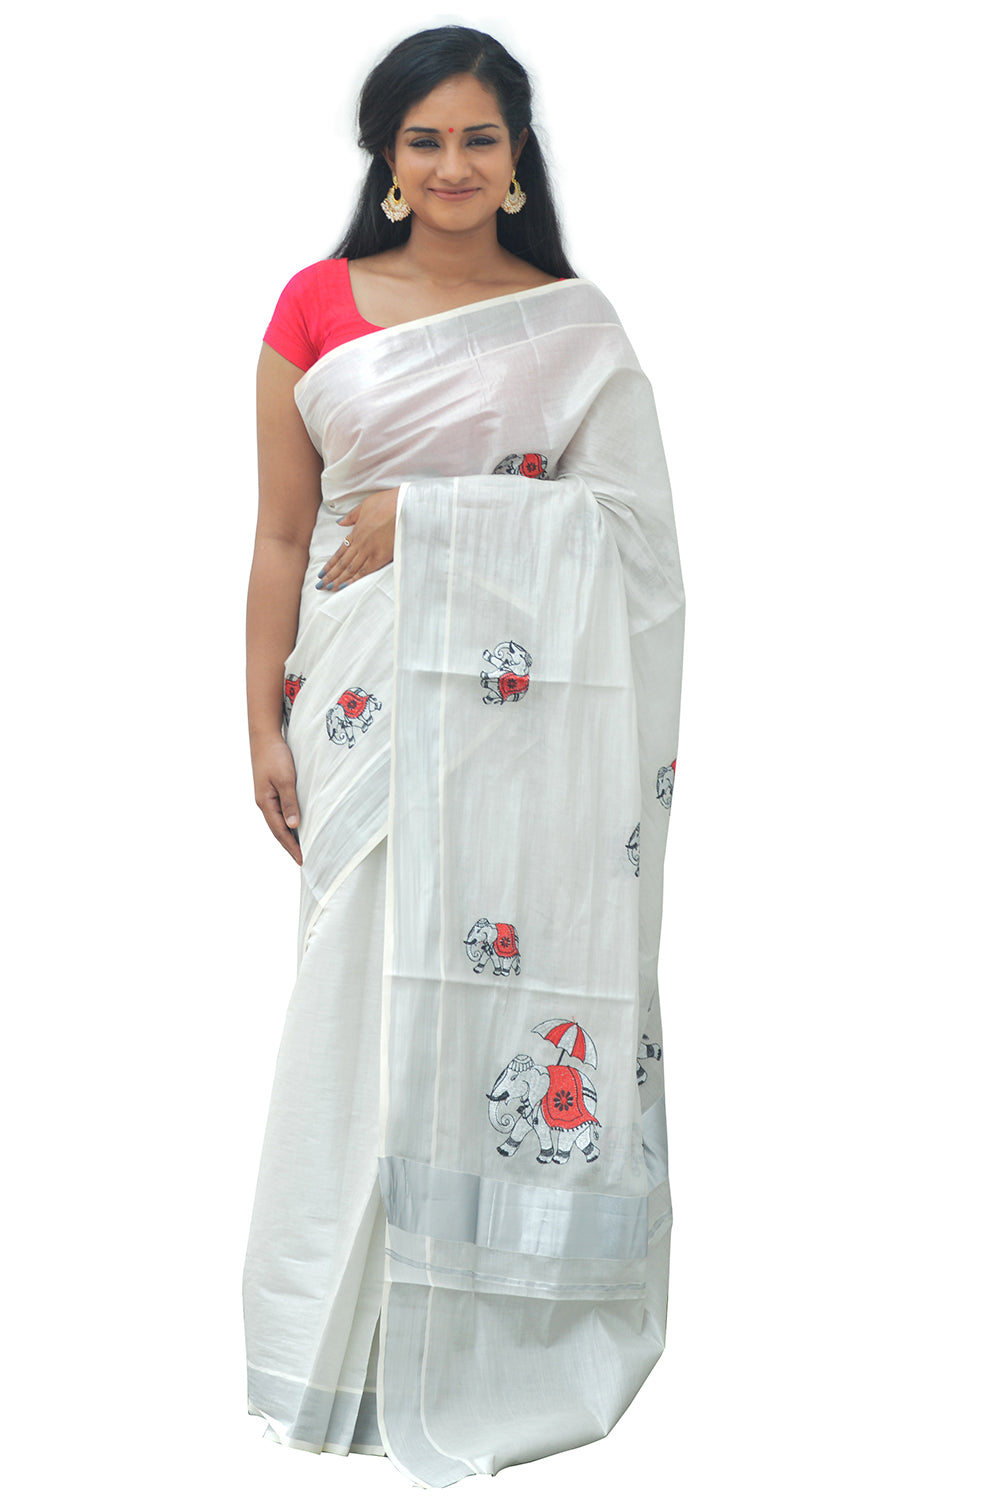 Silver Tissue Saree with Black and Red Elephant Embroidery